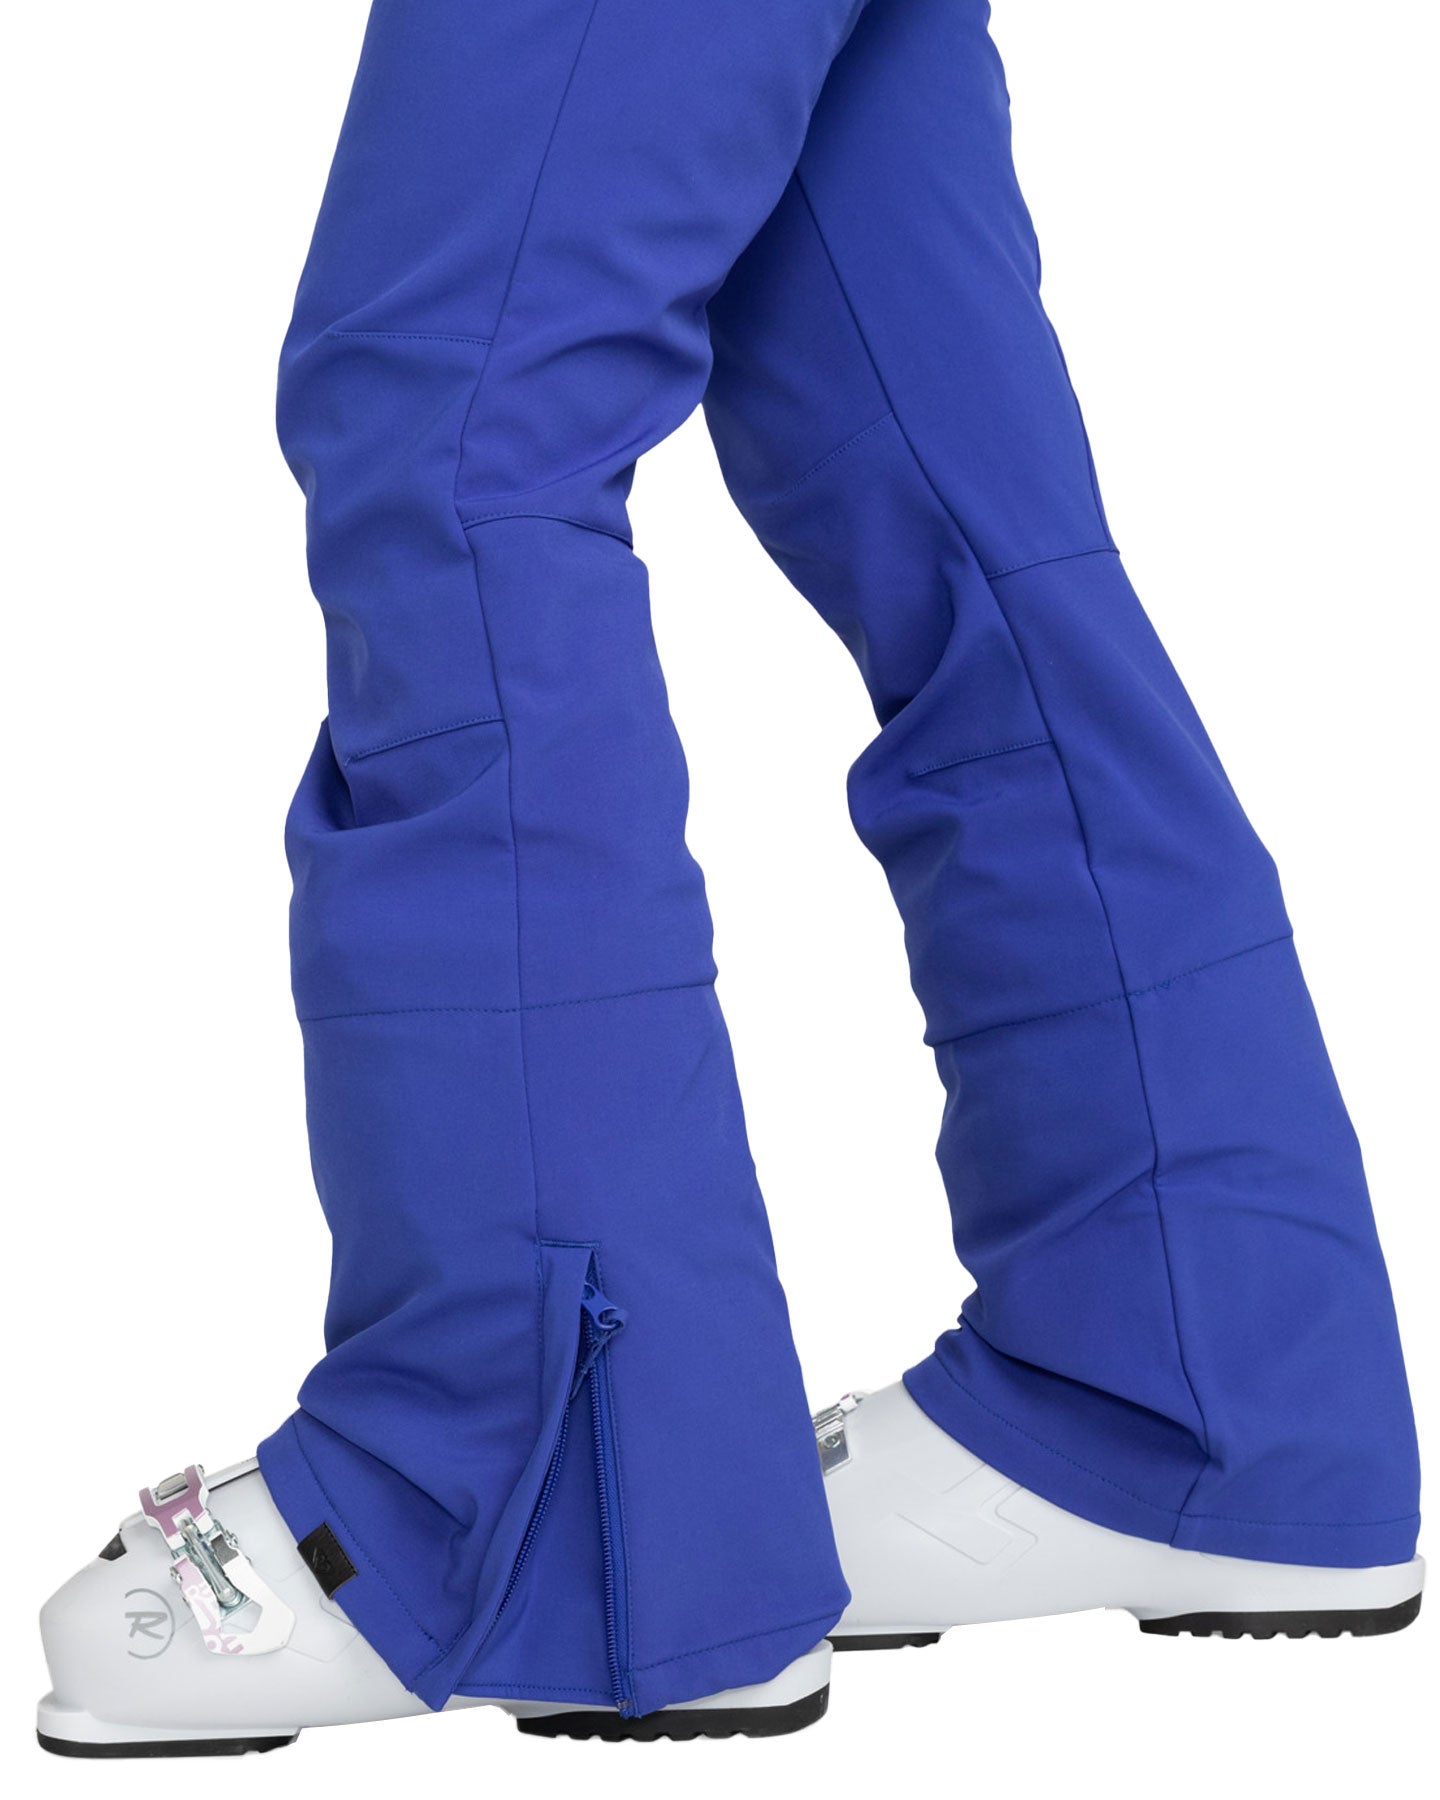 Rising High Skinny - Technical Snow Pants for Women